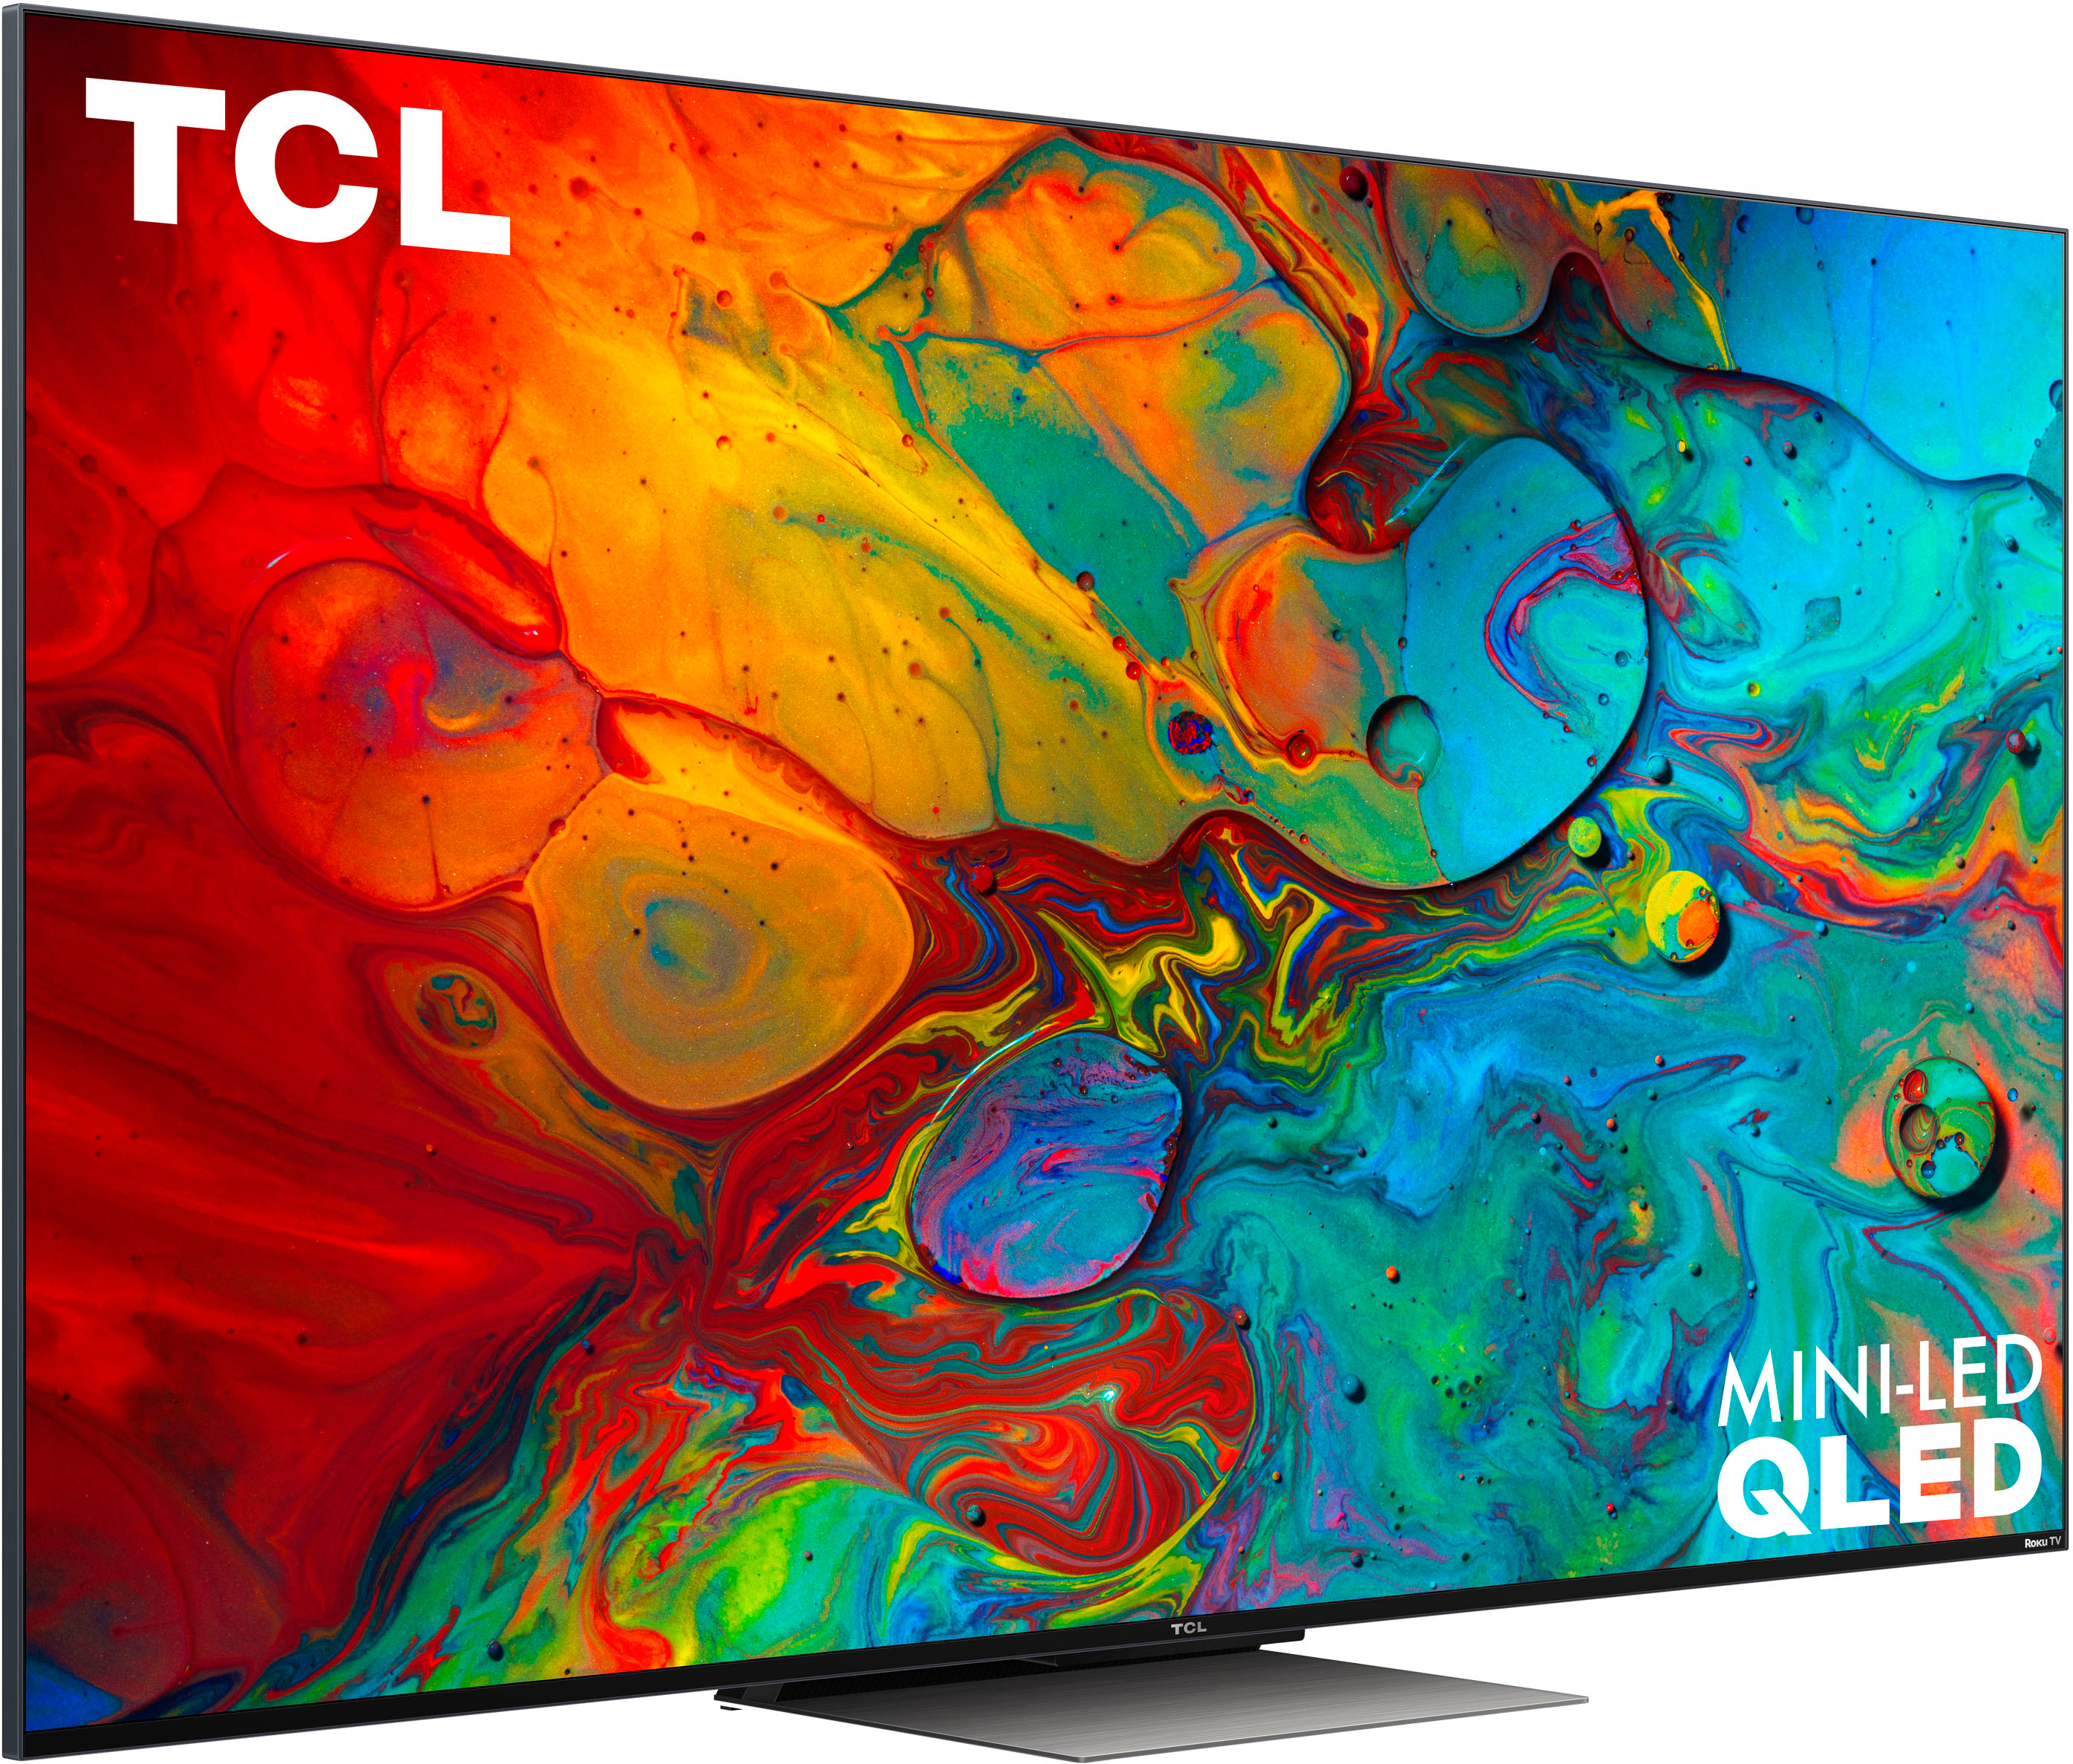 TCL 55-Inch 6-Series 4K Roku TV (55R635) Review